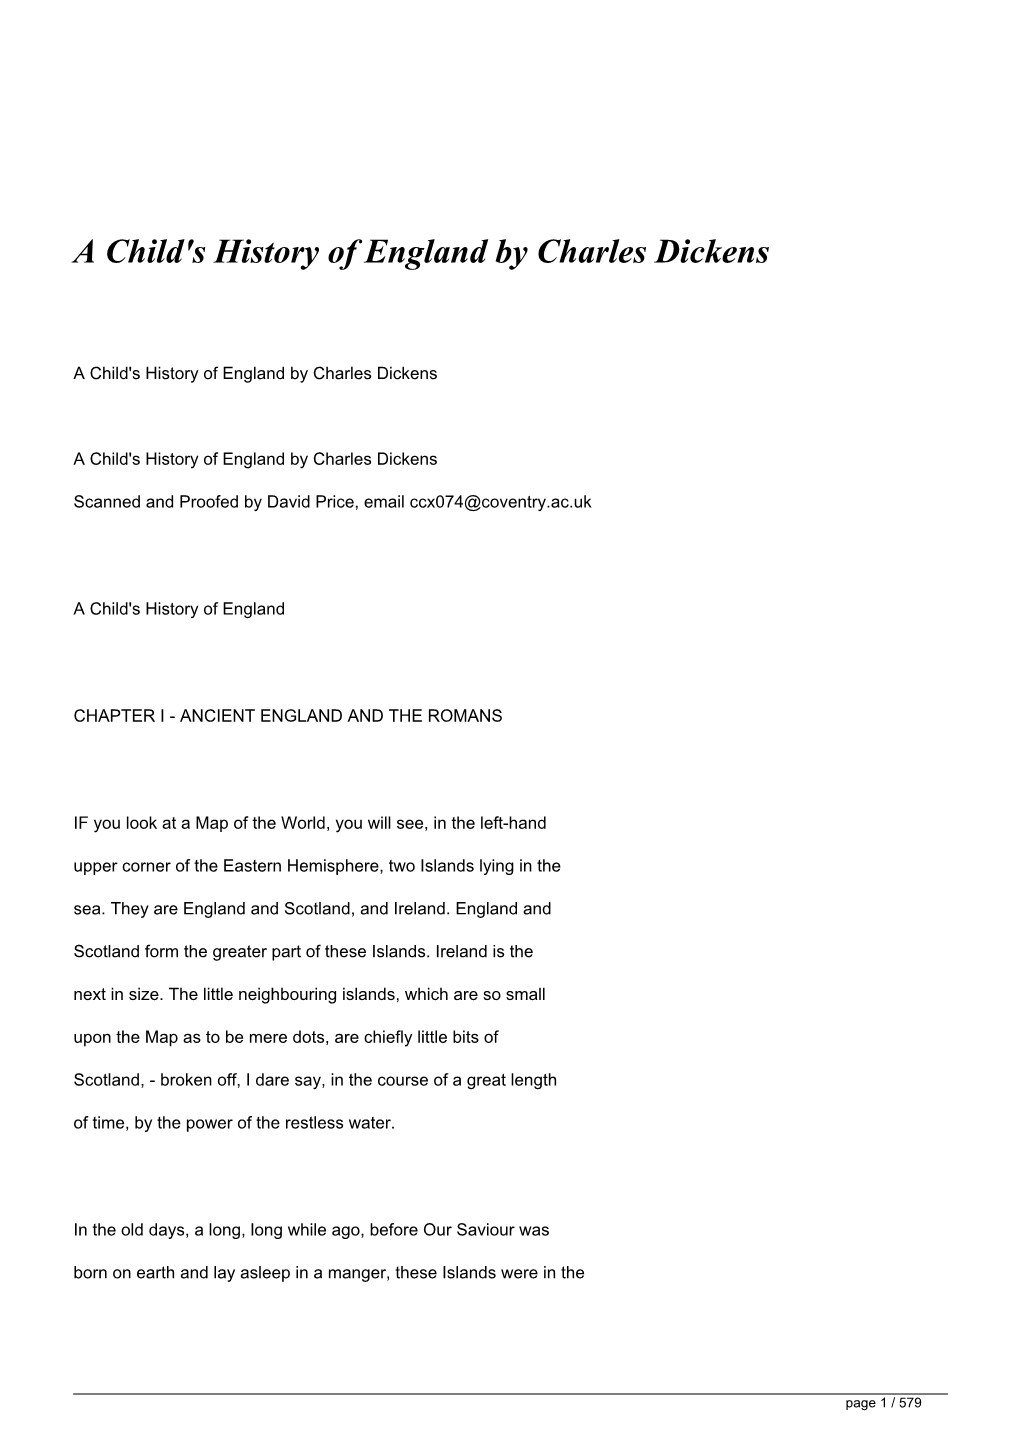 &lt;H1&gt;A Child's History of England by Charles